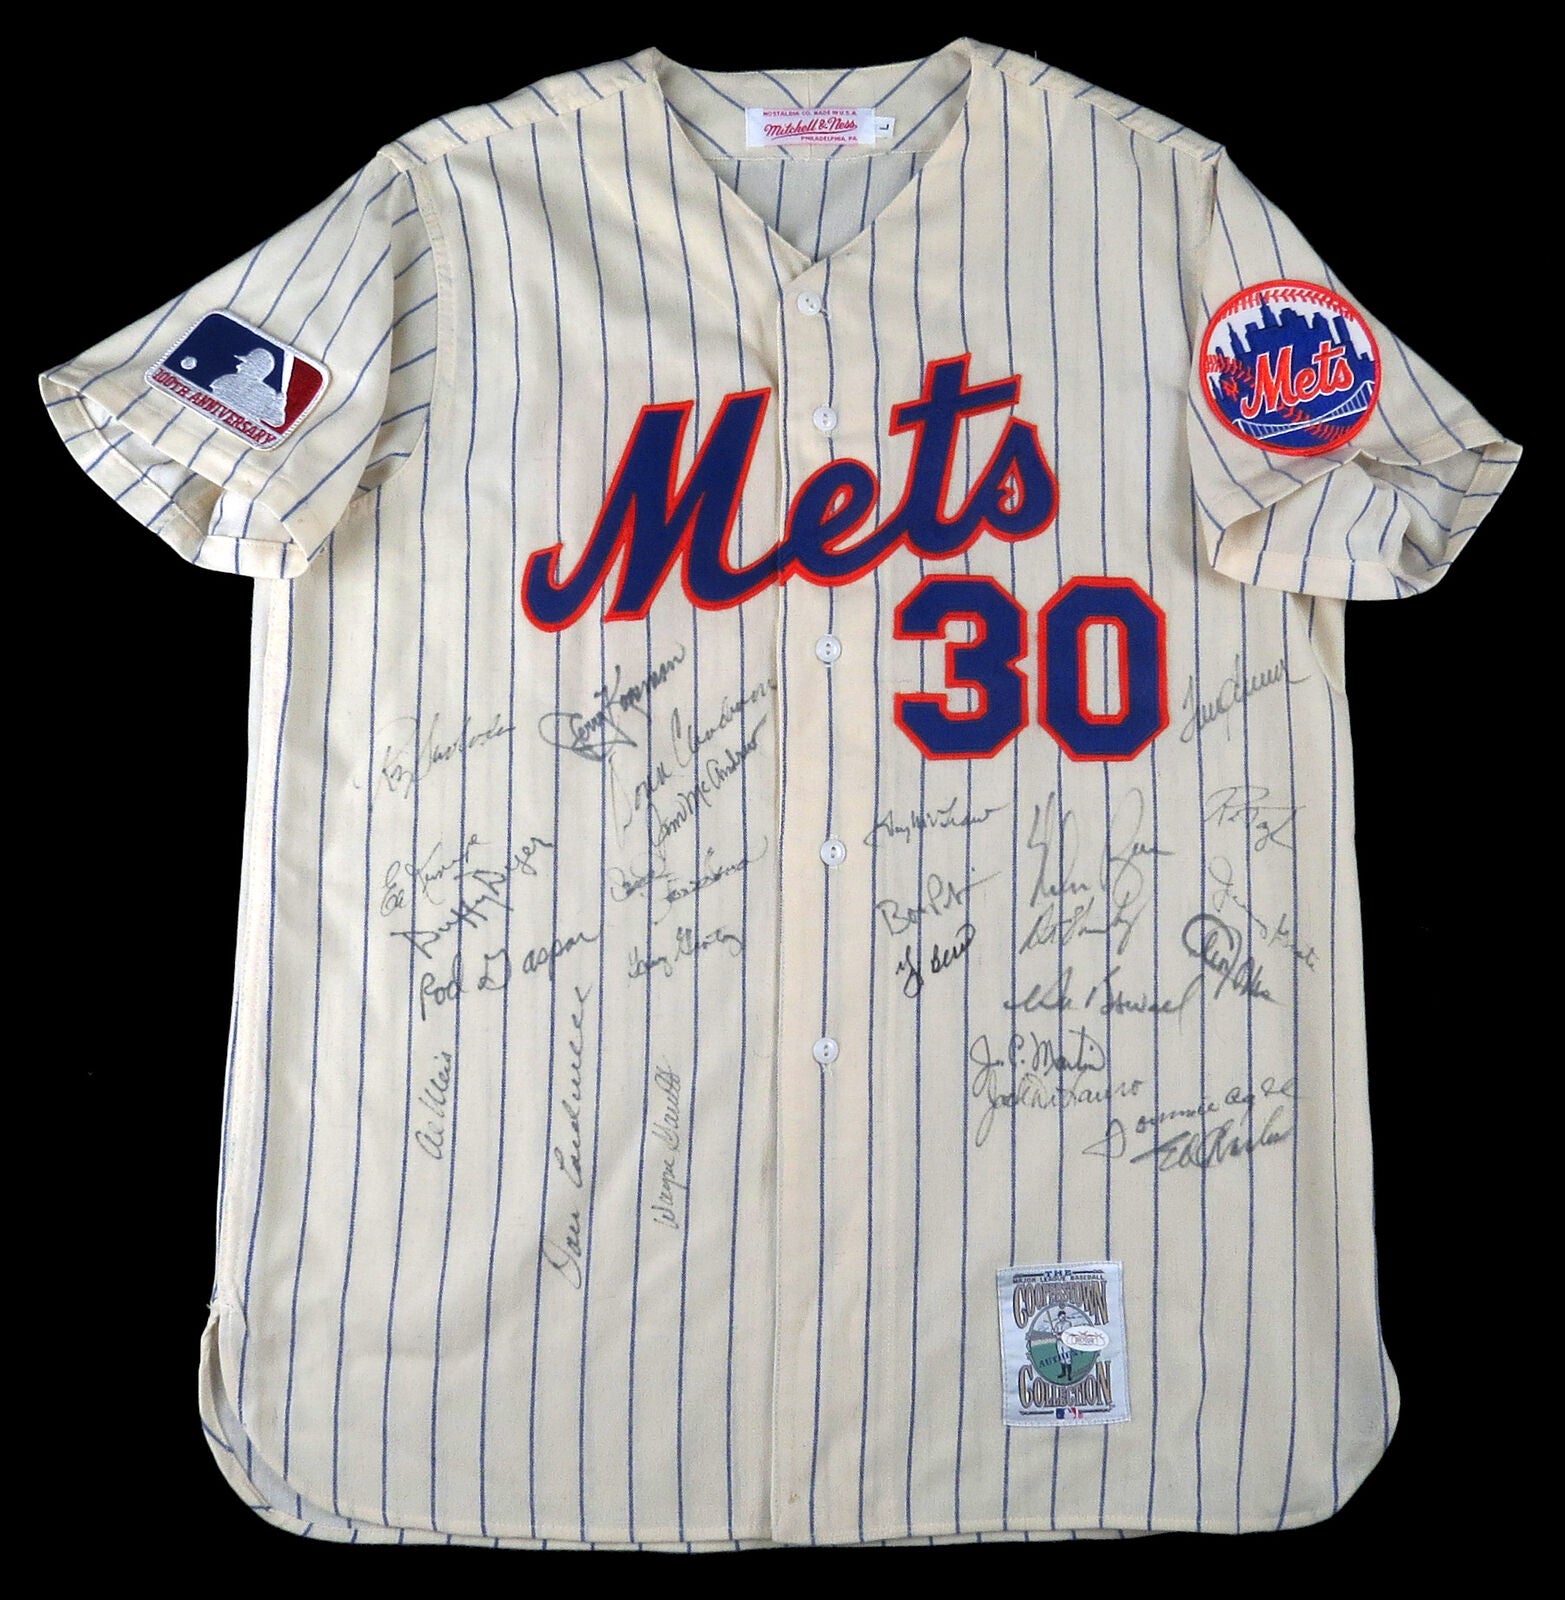 Tom Seaver Autographed Signed 1969 World Series Champs Authentic